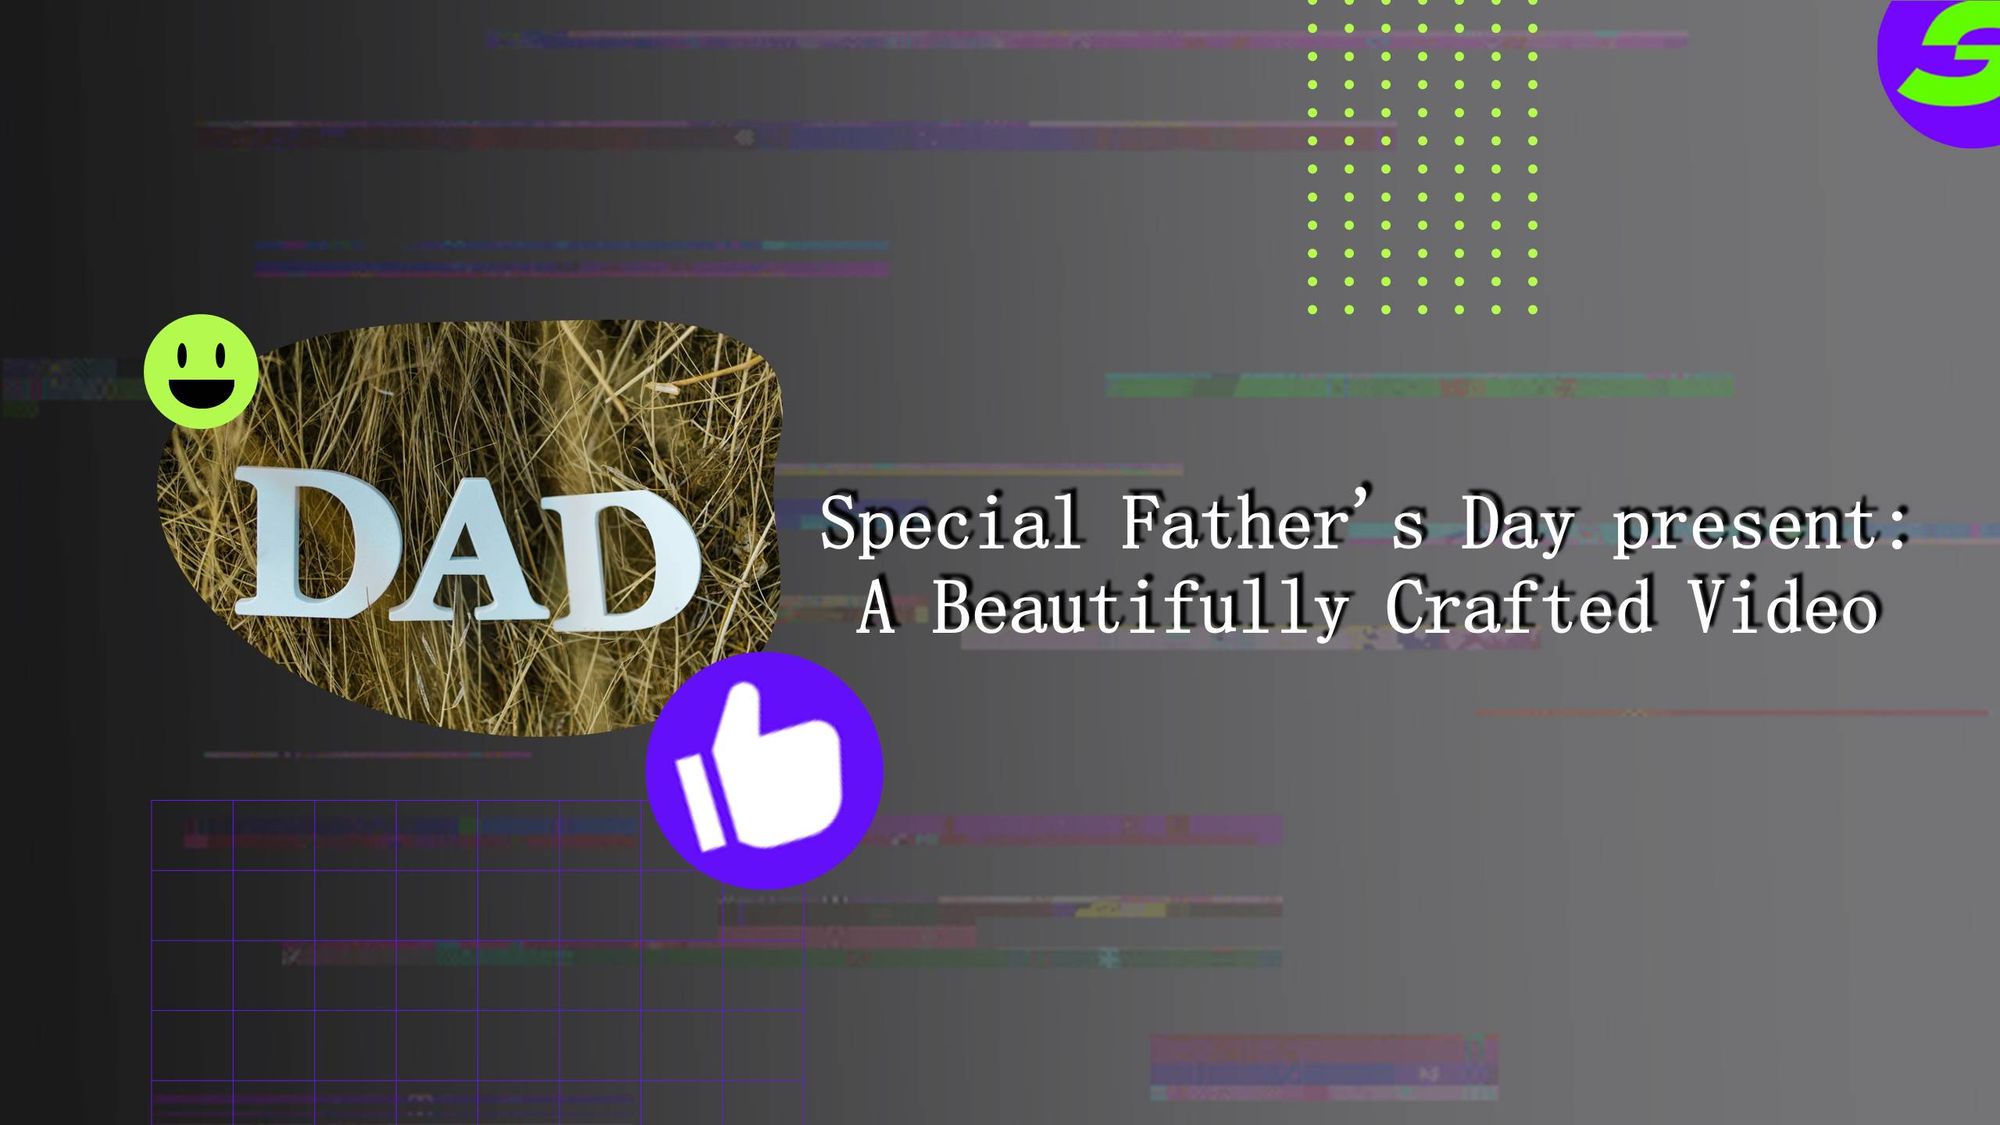 Use the Free video editor to Create a Special Father's Day present